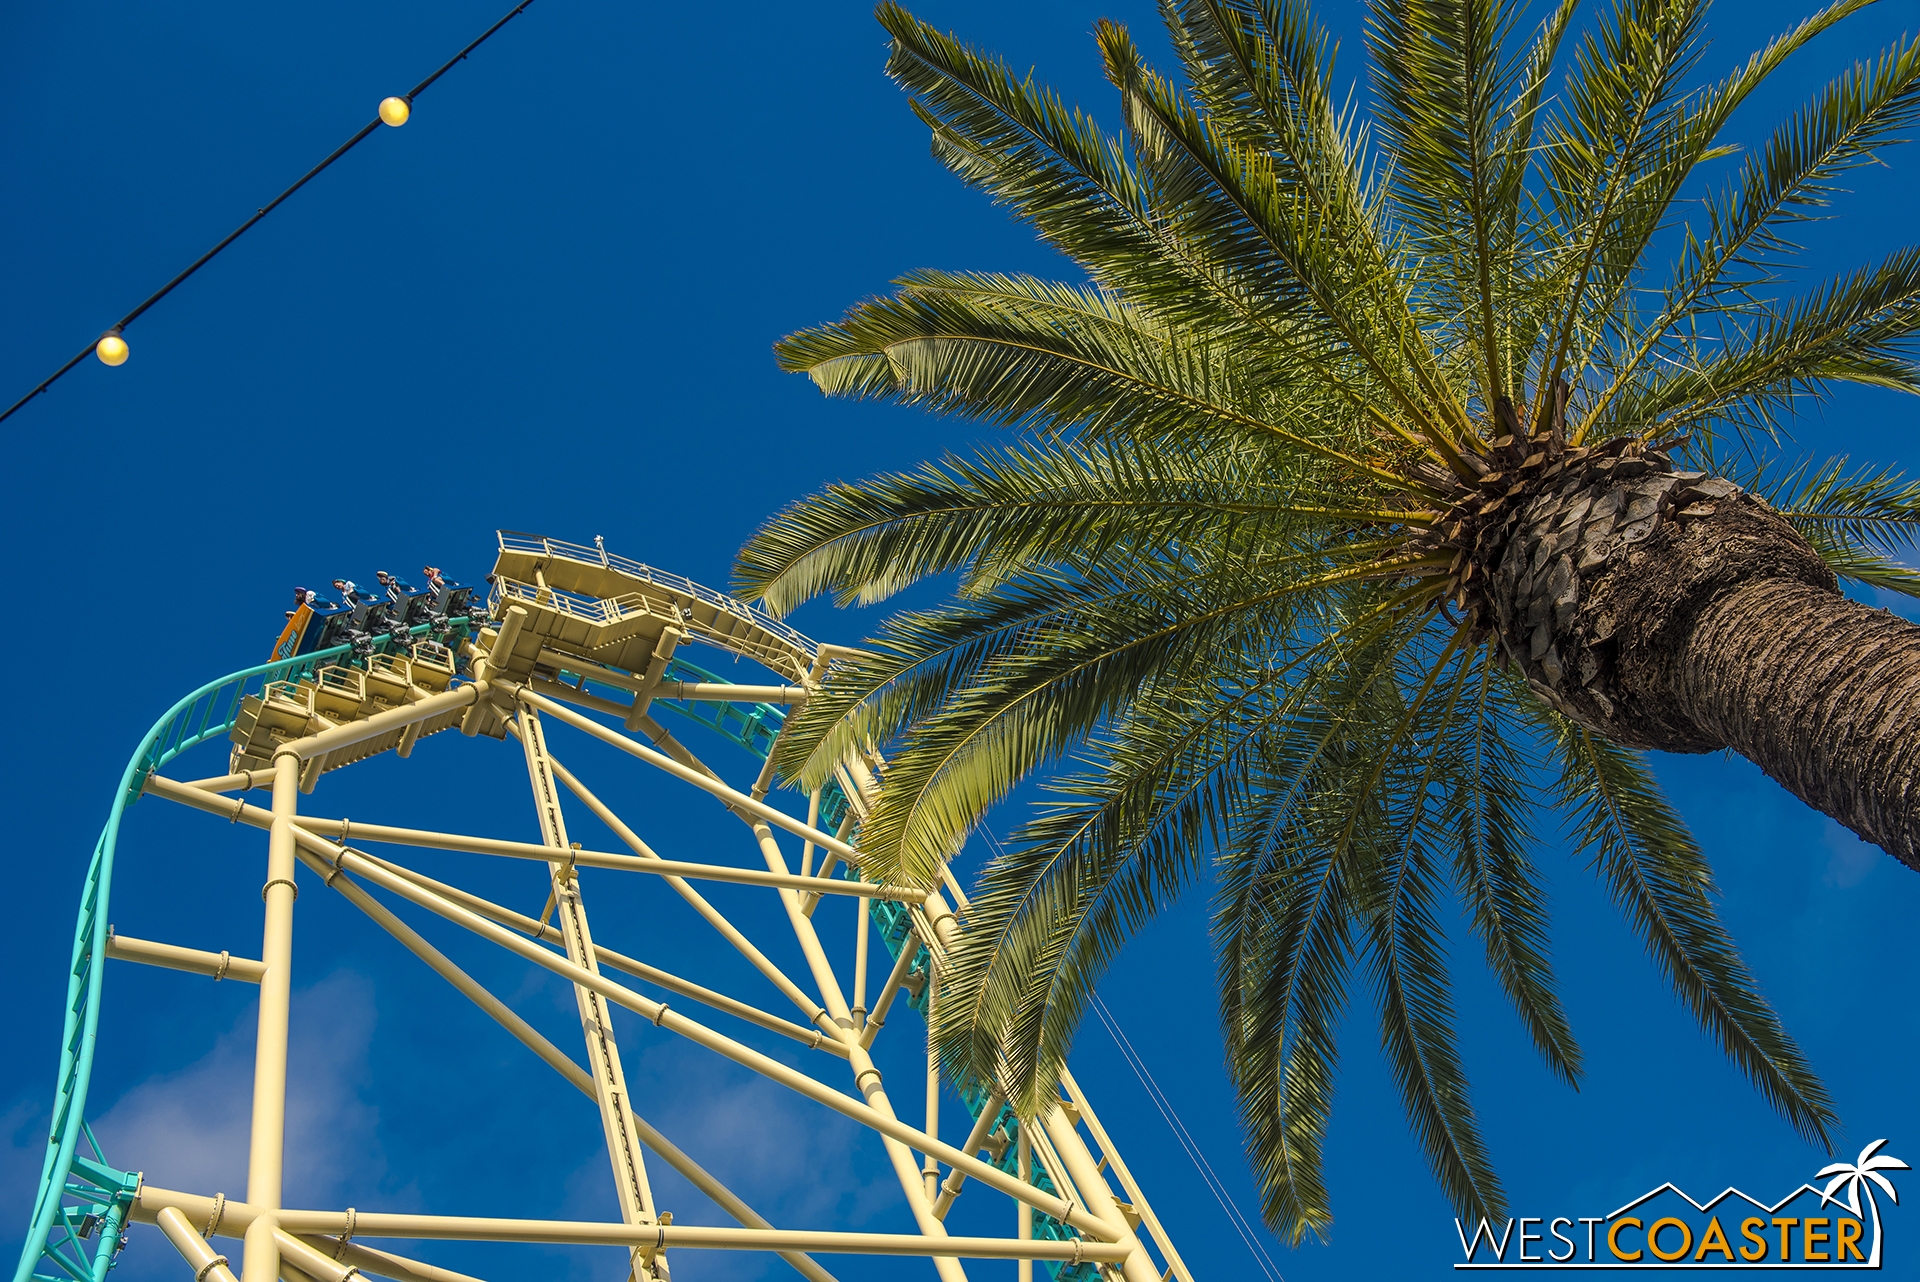  So here’s a bunch of pretty, blue sky pics with HangTime! 